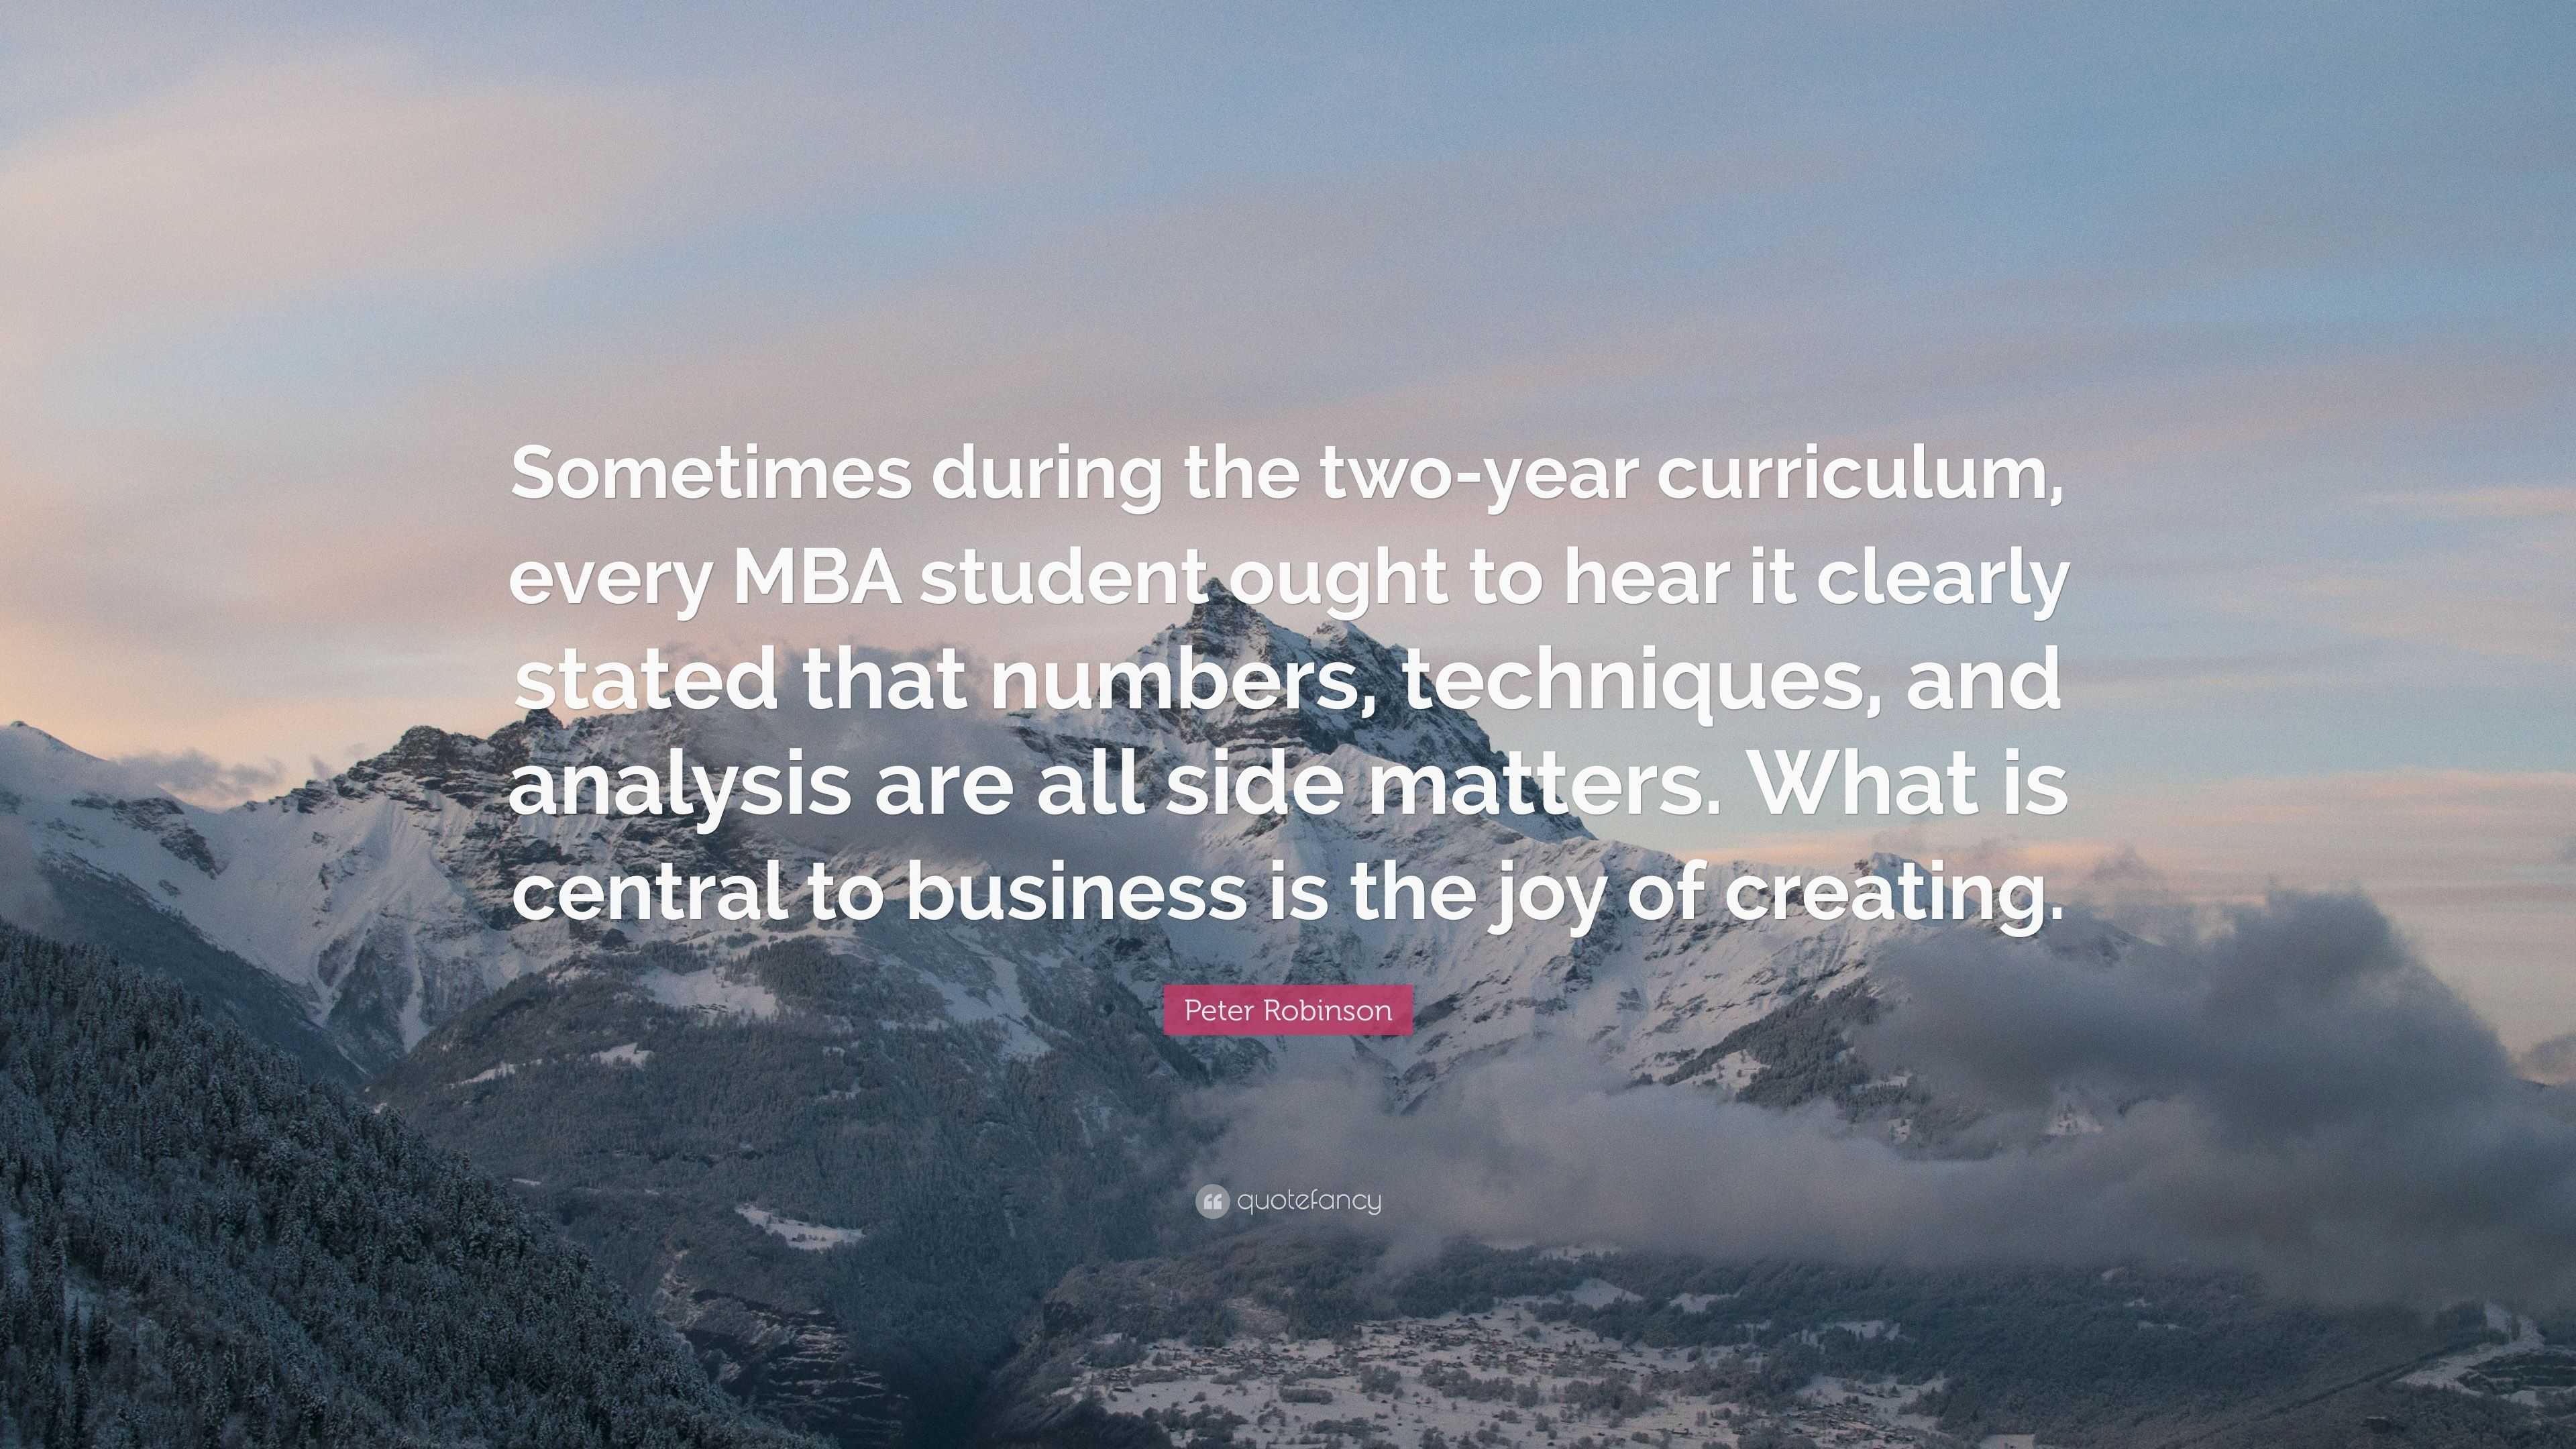 Peter Robinson Quote: “Sometimes during the two-year curriculum, every ...